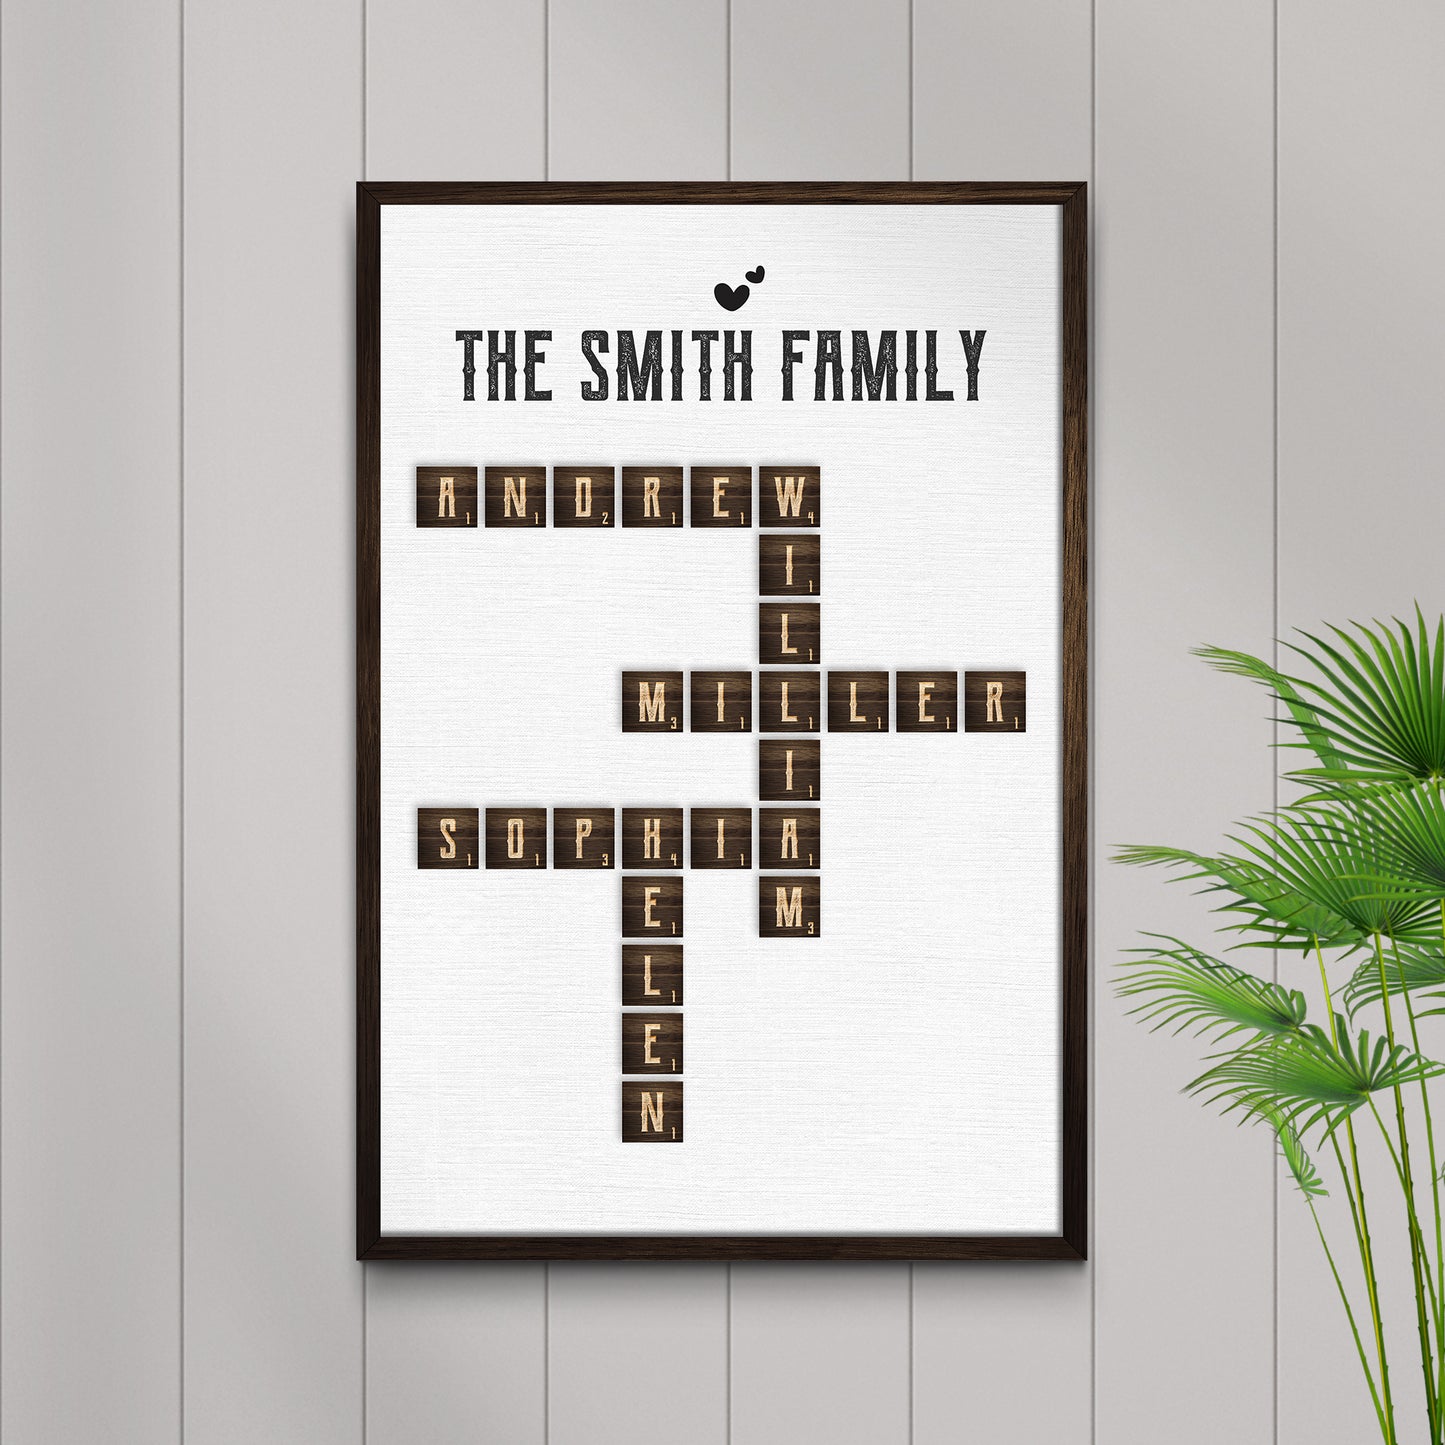 Scrabble Family Name Sign Style 1 - Image by Tailored Canvases